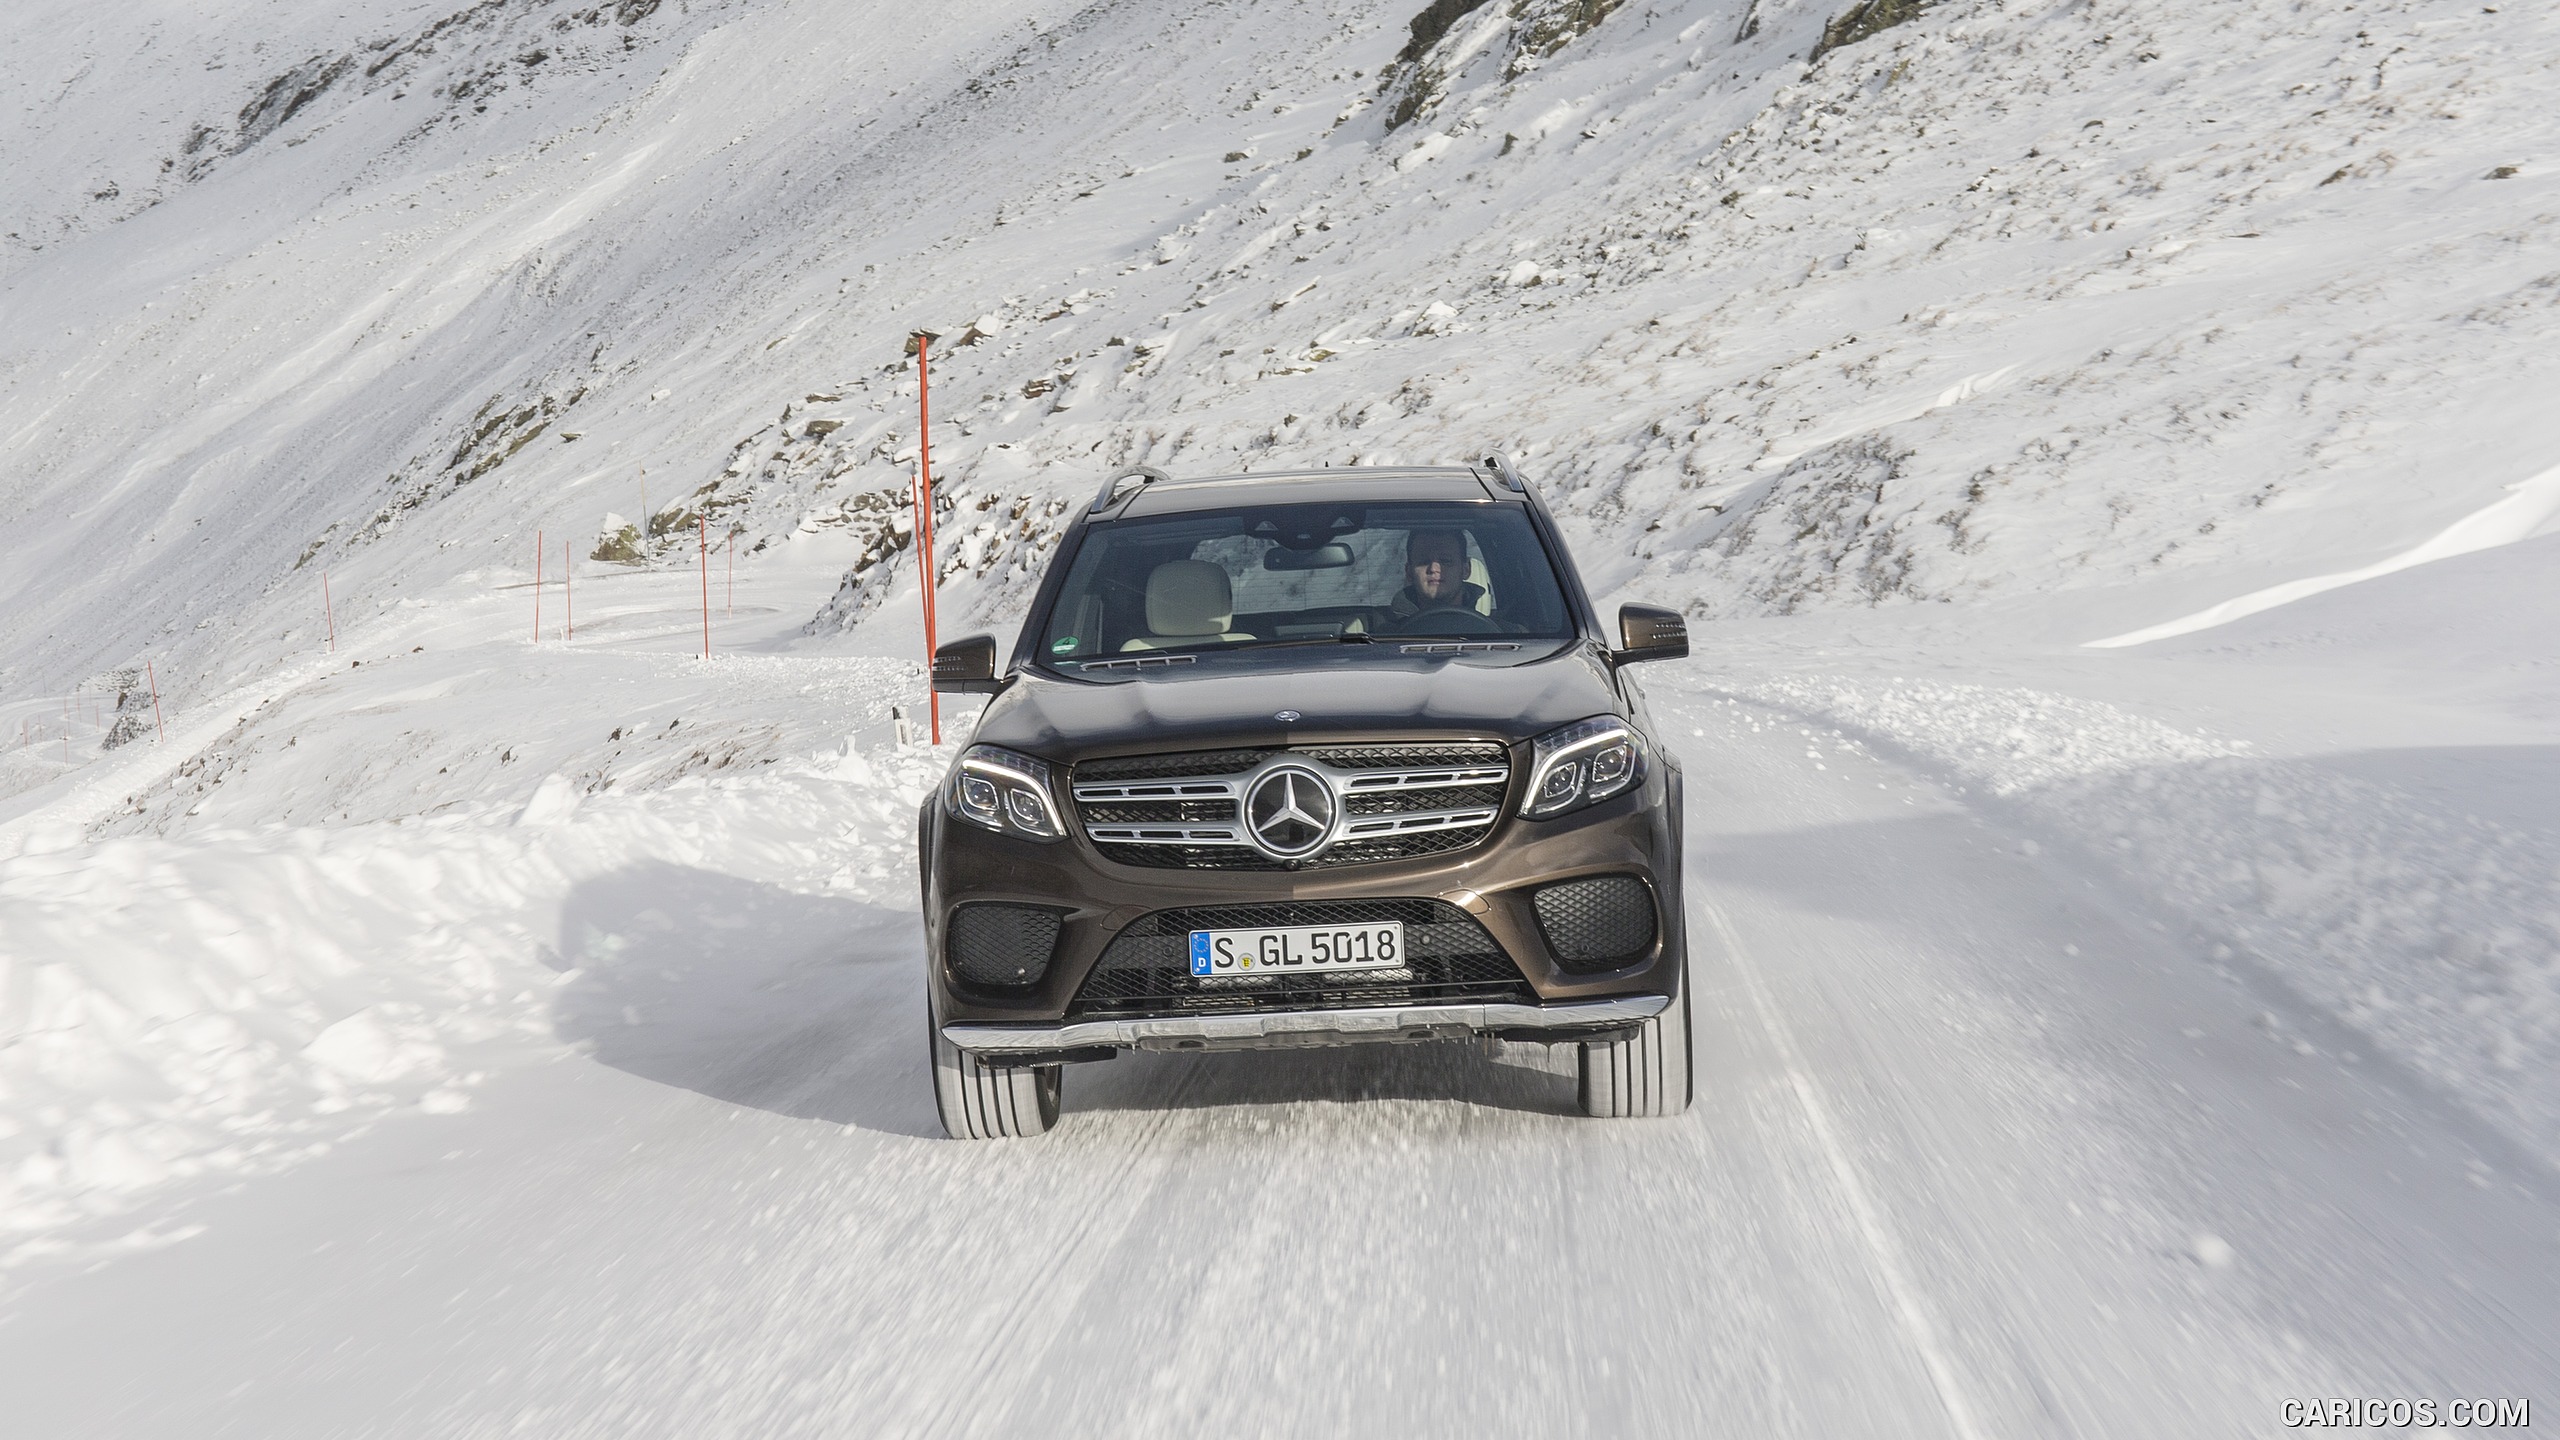 2017 Mercedes-Benz GLS 350d 4MATIC AMG Line in Snow - Front, #184 of 255